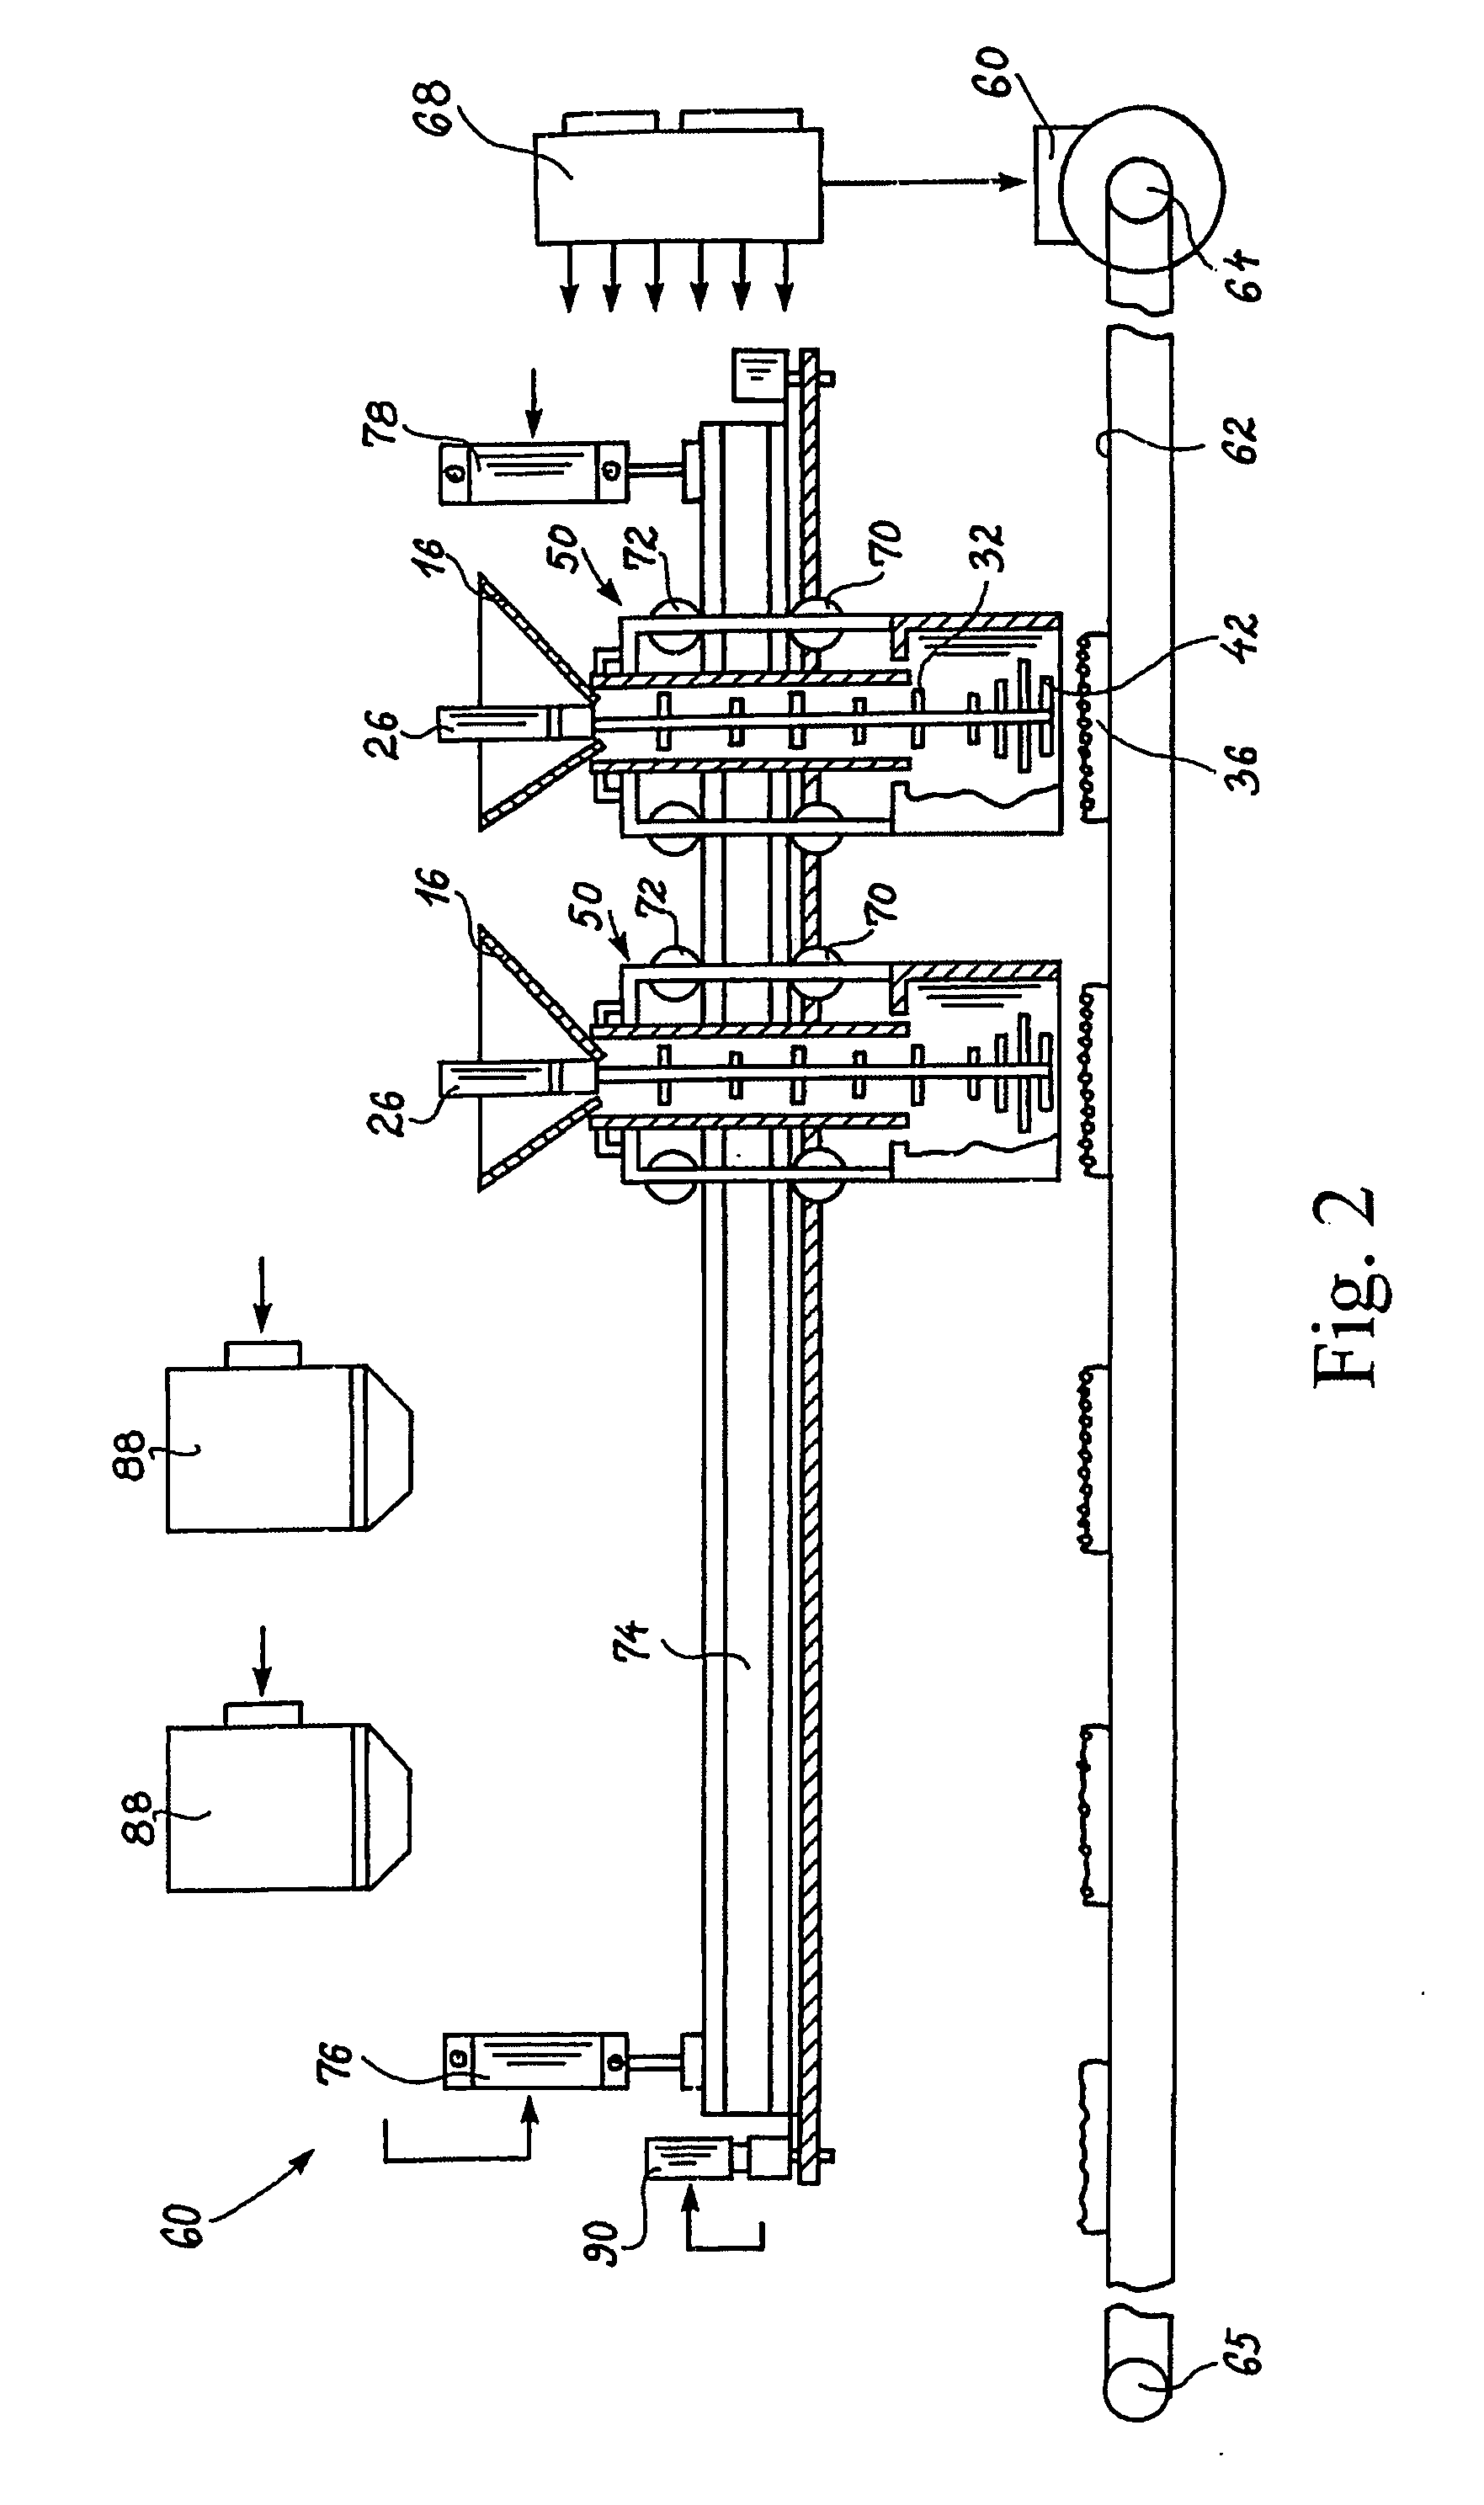 Method and apparatus for applying and distributing particulate material on a substrate